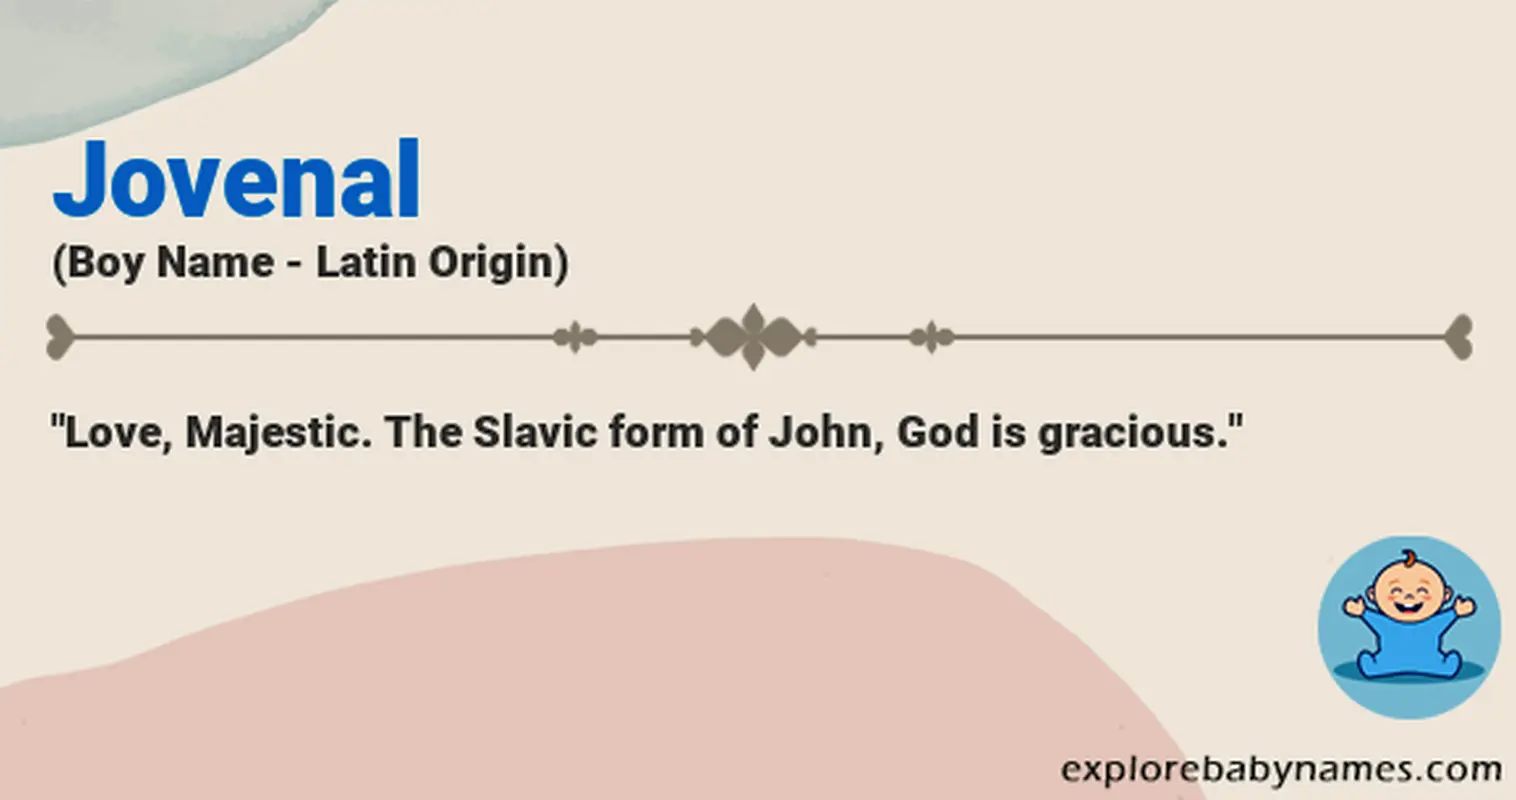 Meaning of Jovenal